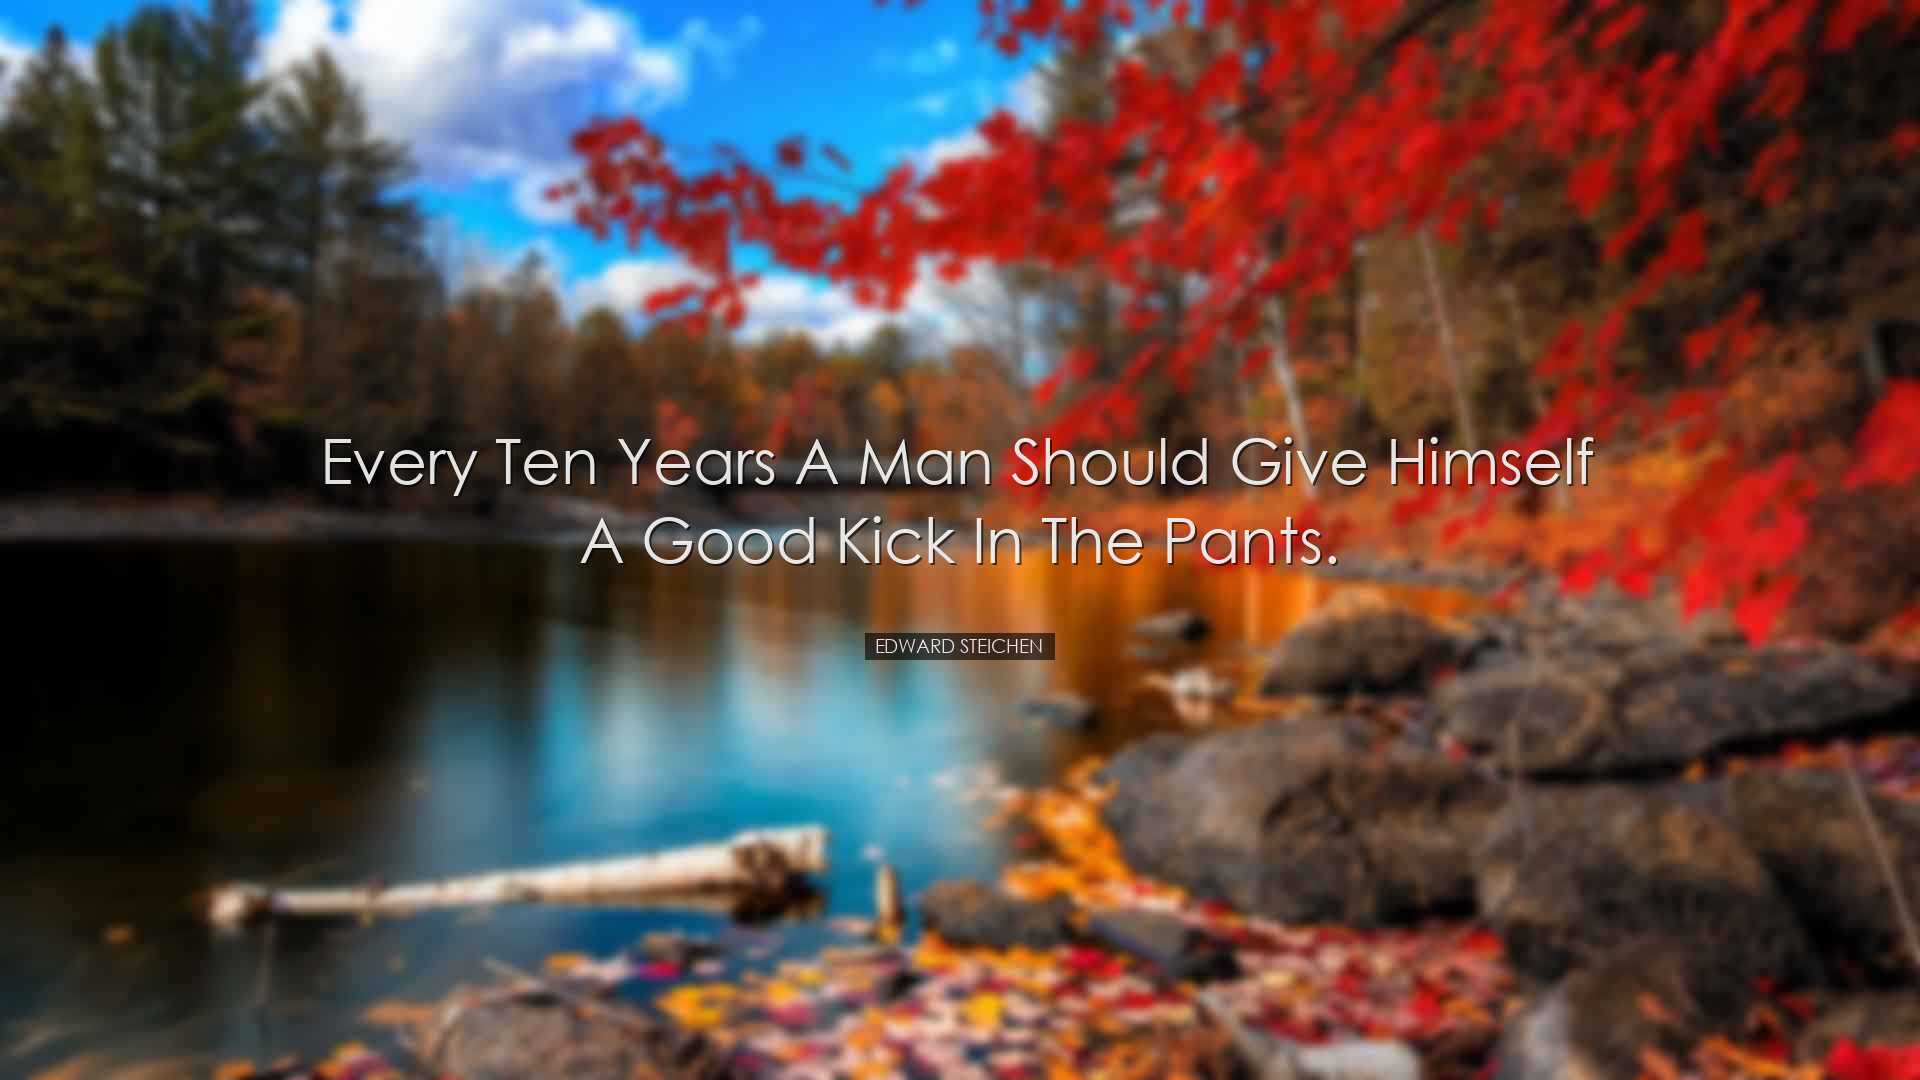 Every ten years a man should give himself a good kick in the pants